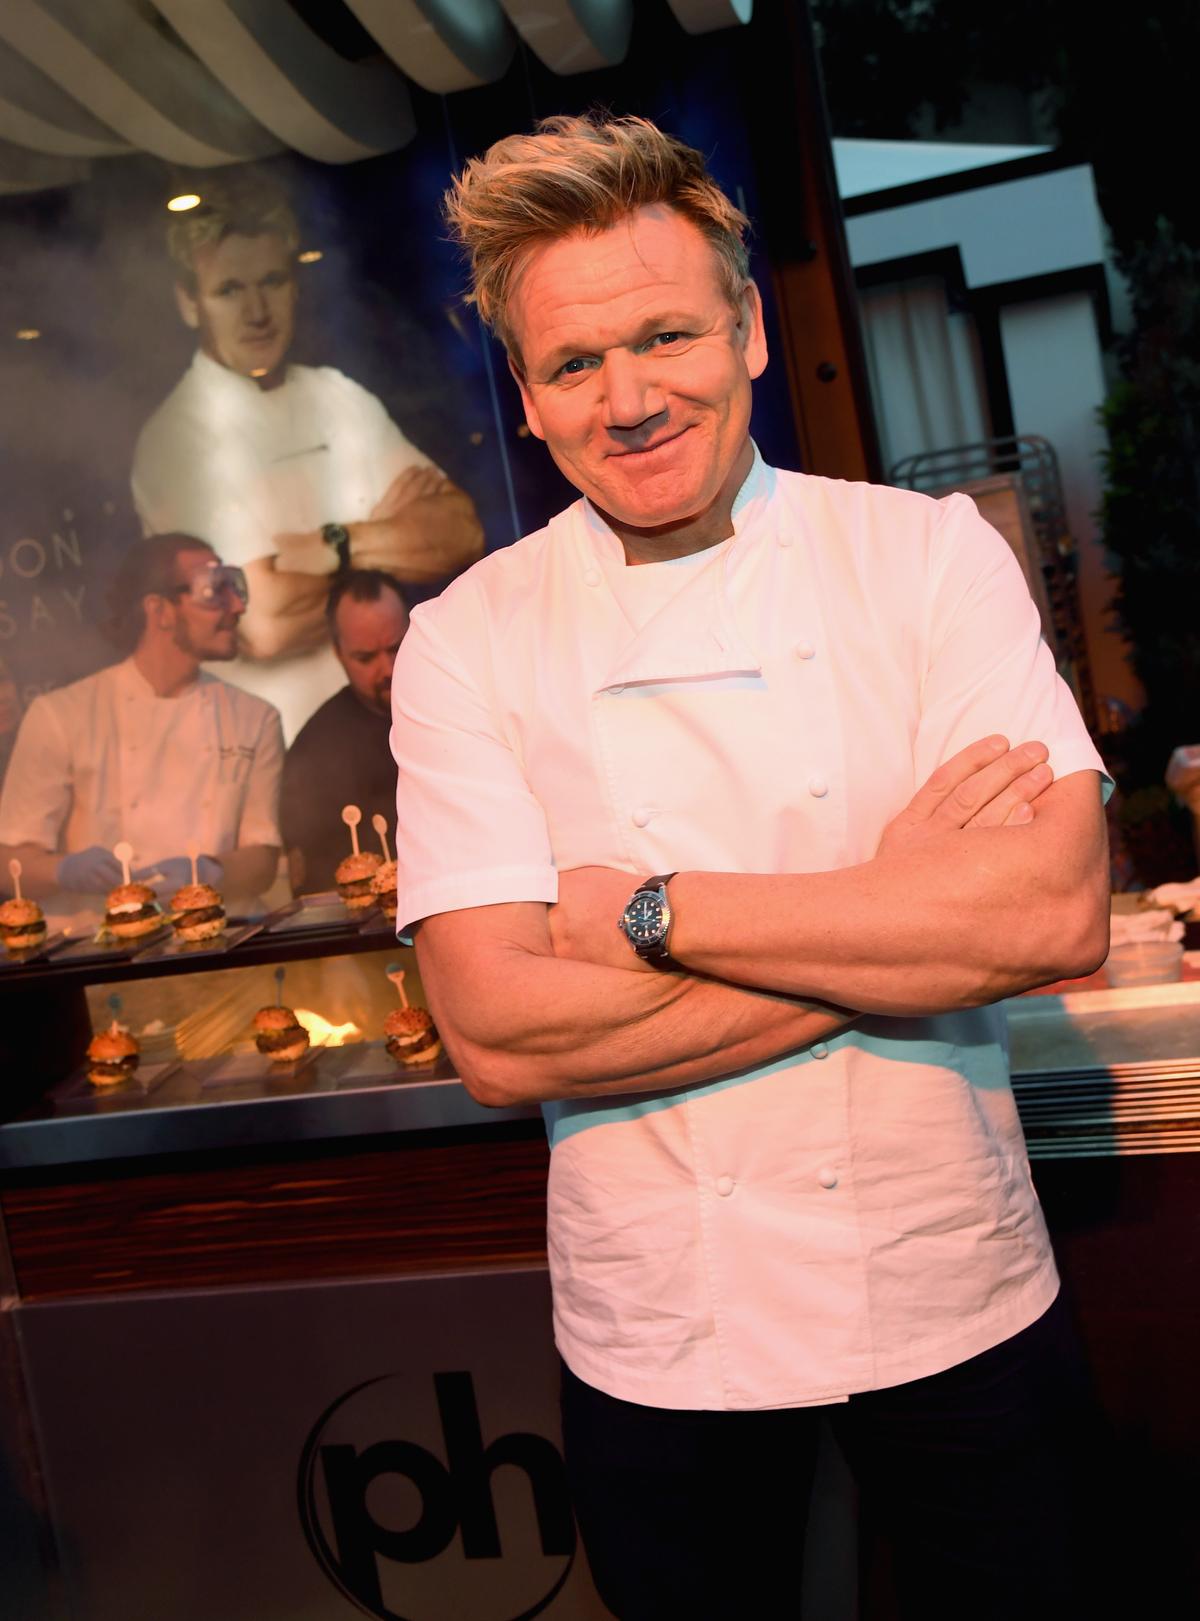 Television personality and chef Gordon Ramsay poses at the Gordon Ramsay Burger booth at the 11th annual Vegas Uncork'd by Bon Appetit Grand Tasting event presented by the Las Vegas Convention and Visitors Authority. (©Getty Images | <a href="https://www.gettyimages.ca/detail/news-photo/television-personality-and-chef-gordon-ramsay-poses-at-the-news-photo/674644714">Ethan Miller</a>)